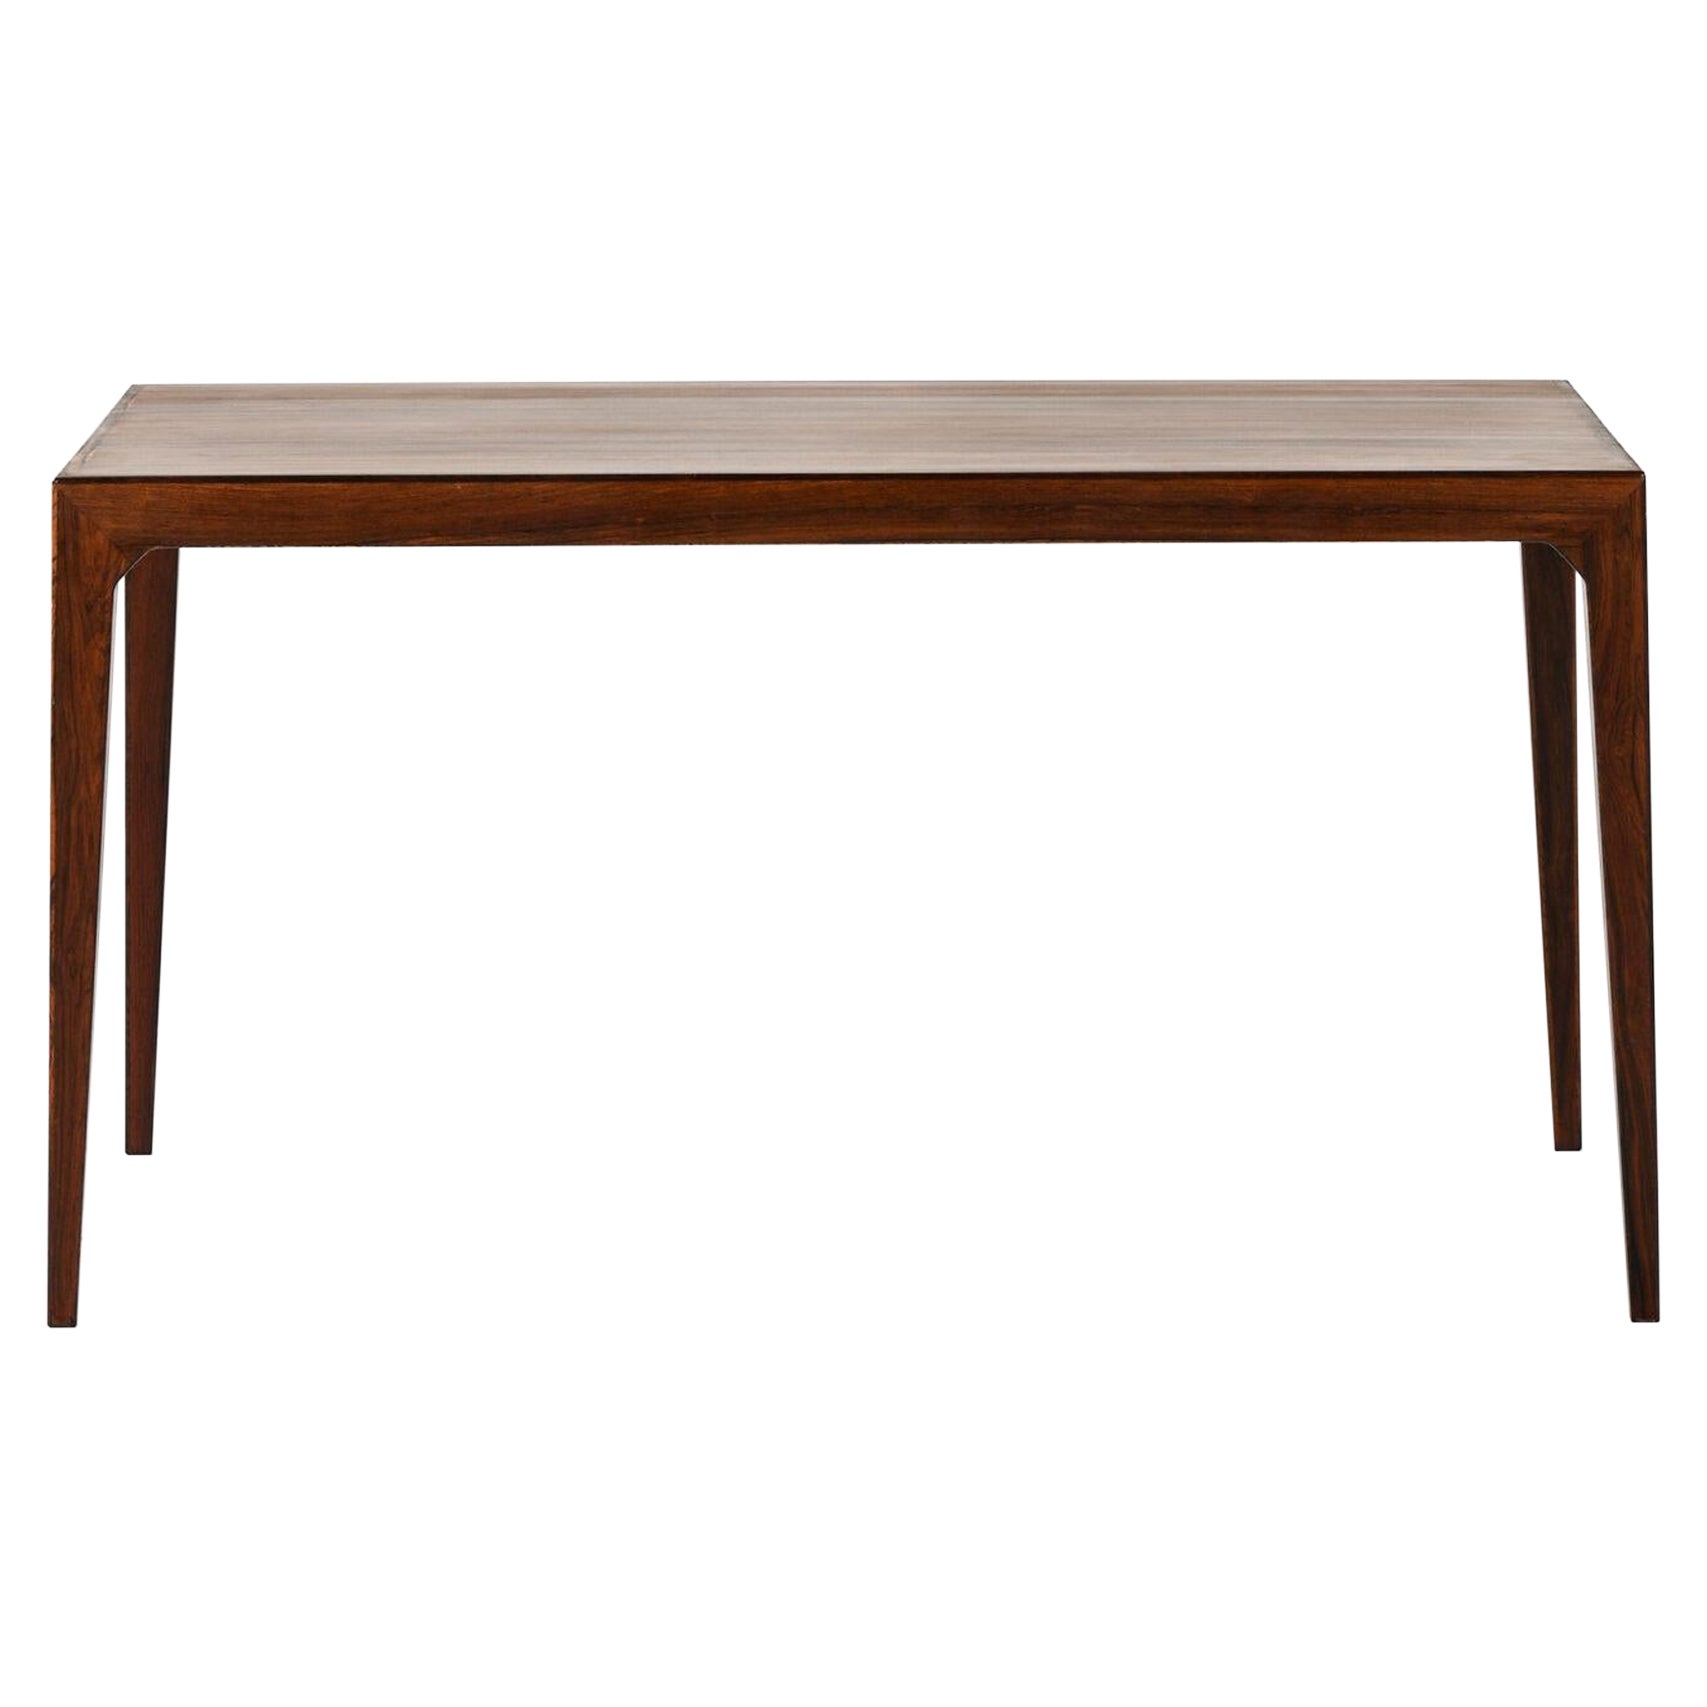 Poul Hundevad & Kai Winding Dining- / Work Table Produced by Poul Hundevad & Co